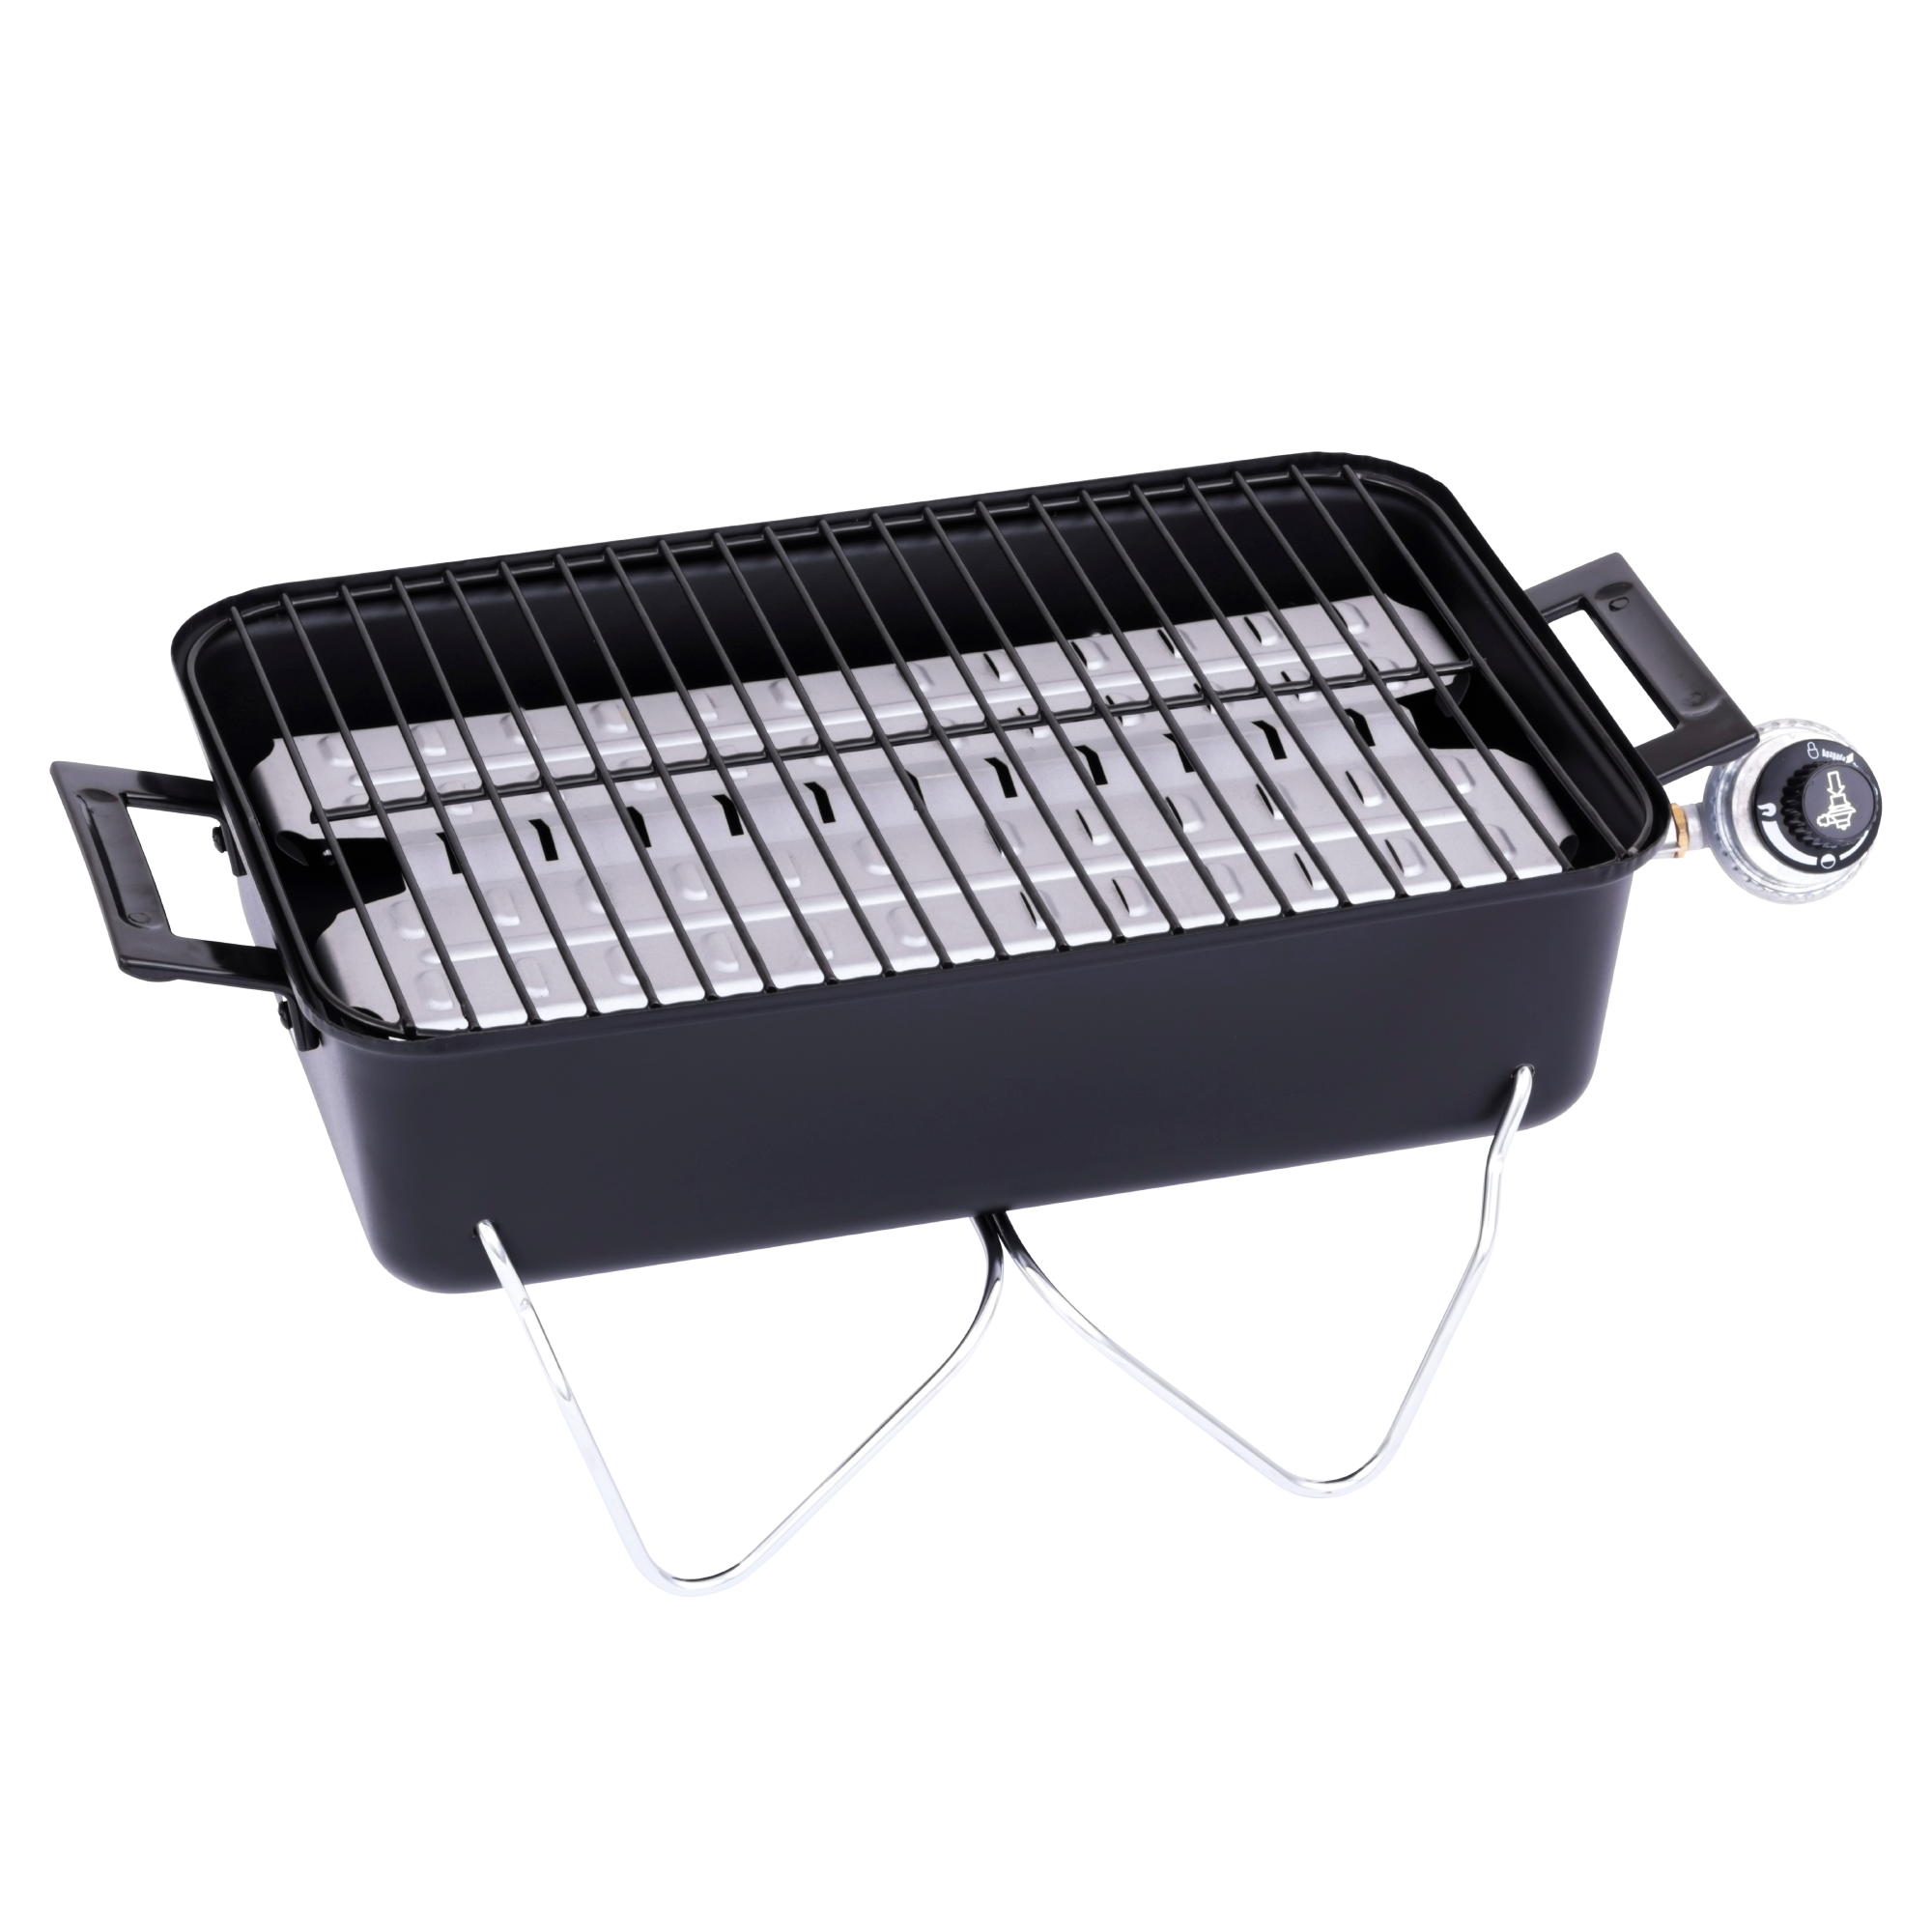 Char-Broil Portable Gas Grill - image 5 of 12